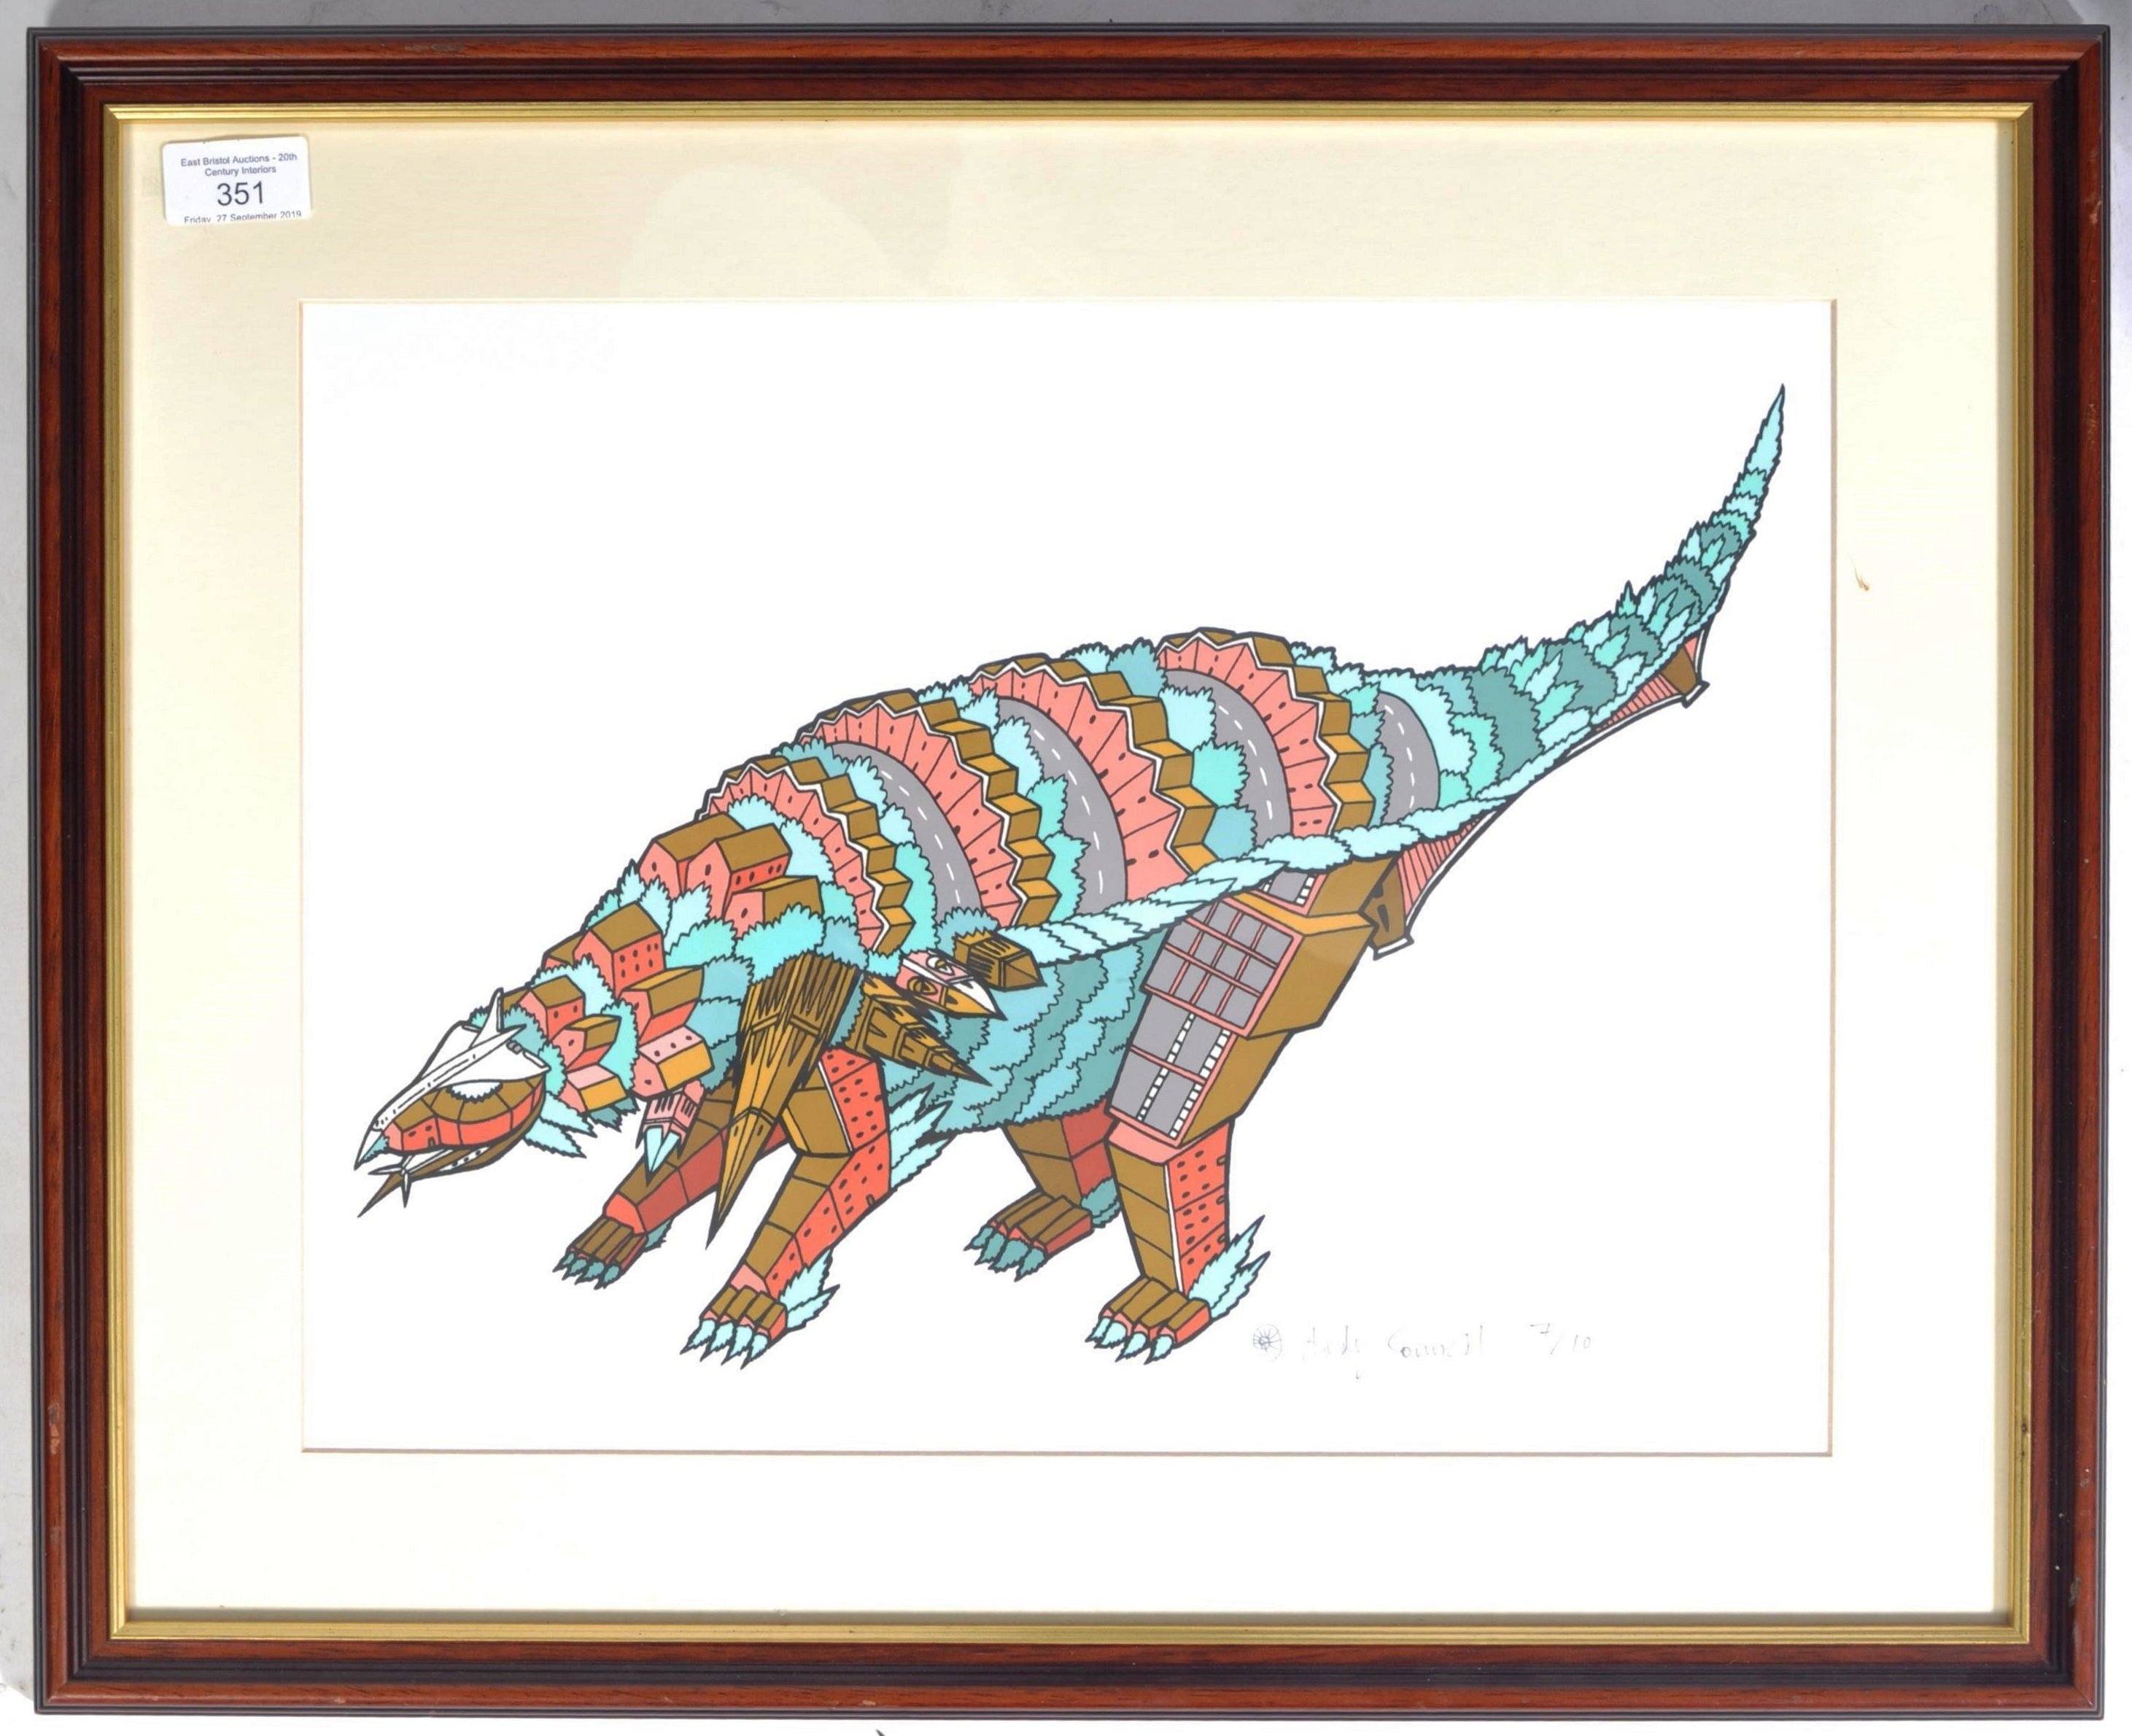 BRISTOL EDMONTONIA 2013 SIGNED LIMITED PRINT BY ANDY COUNCIL